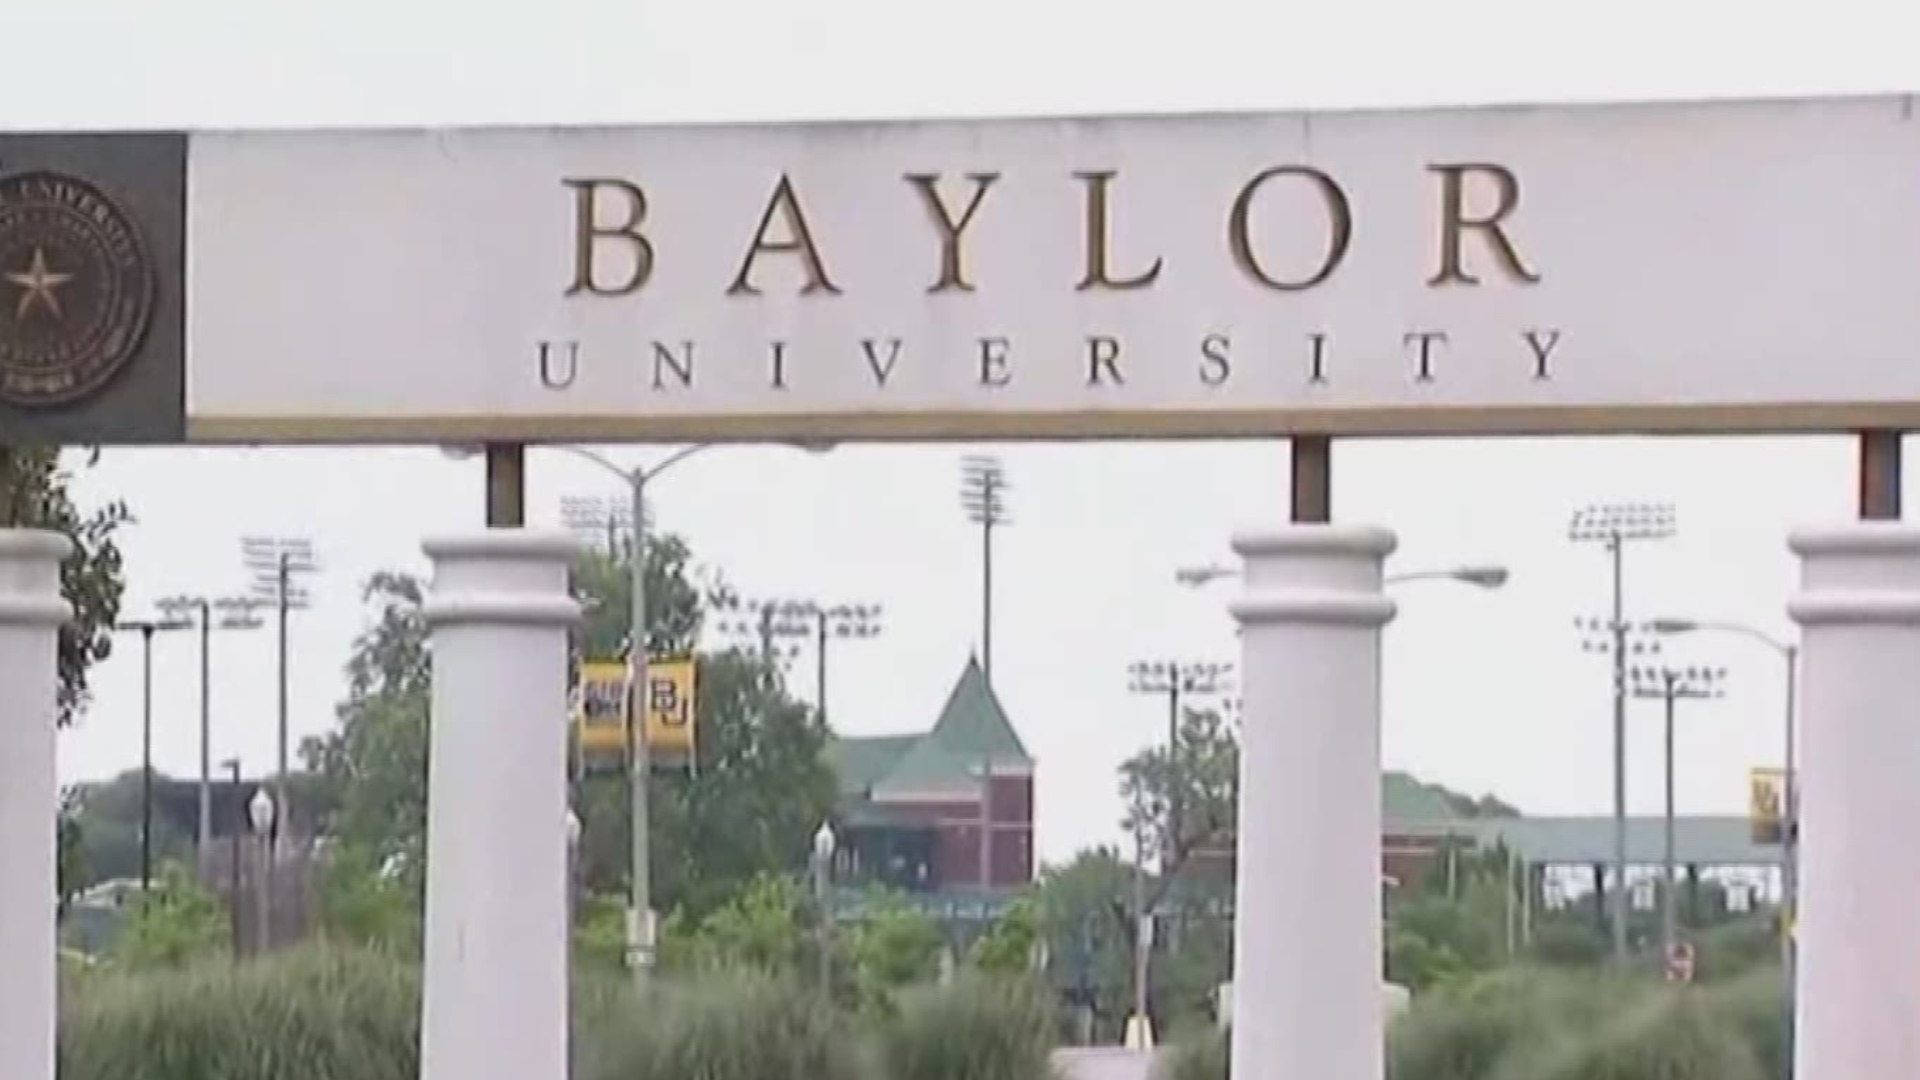 A federal judge has ordered a law firm to turn over thousands of records that lawyers say should give a fuller accounting of how Baylor University responded to students' sexual assault allegations.